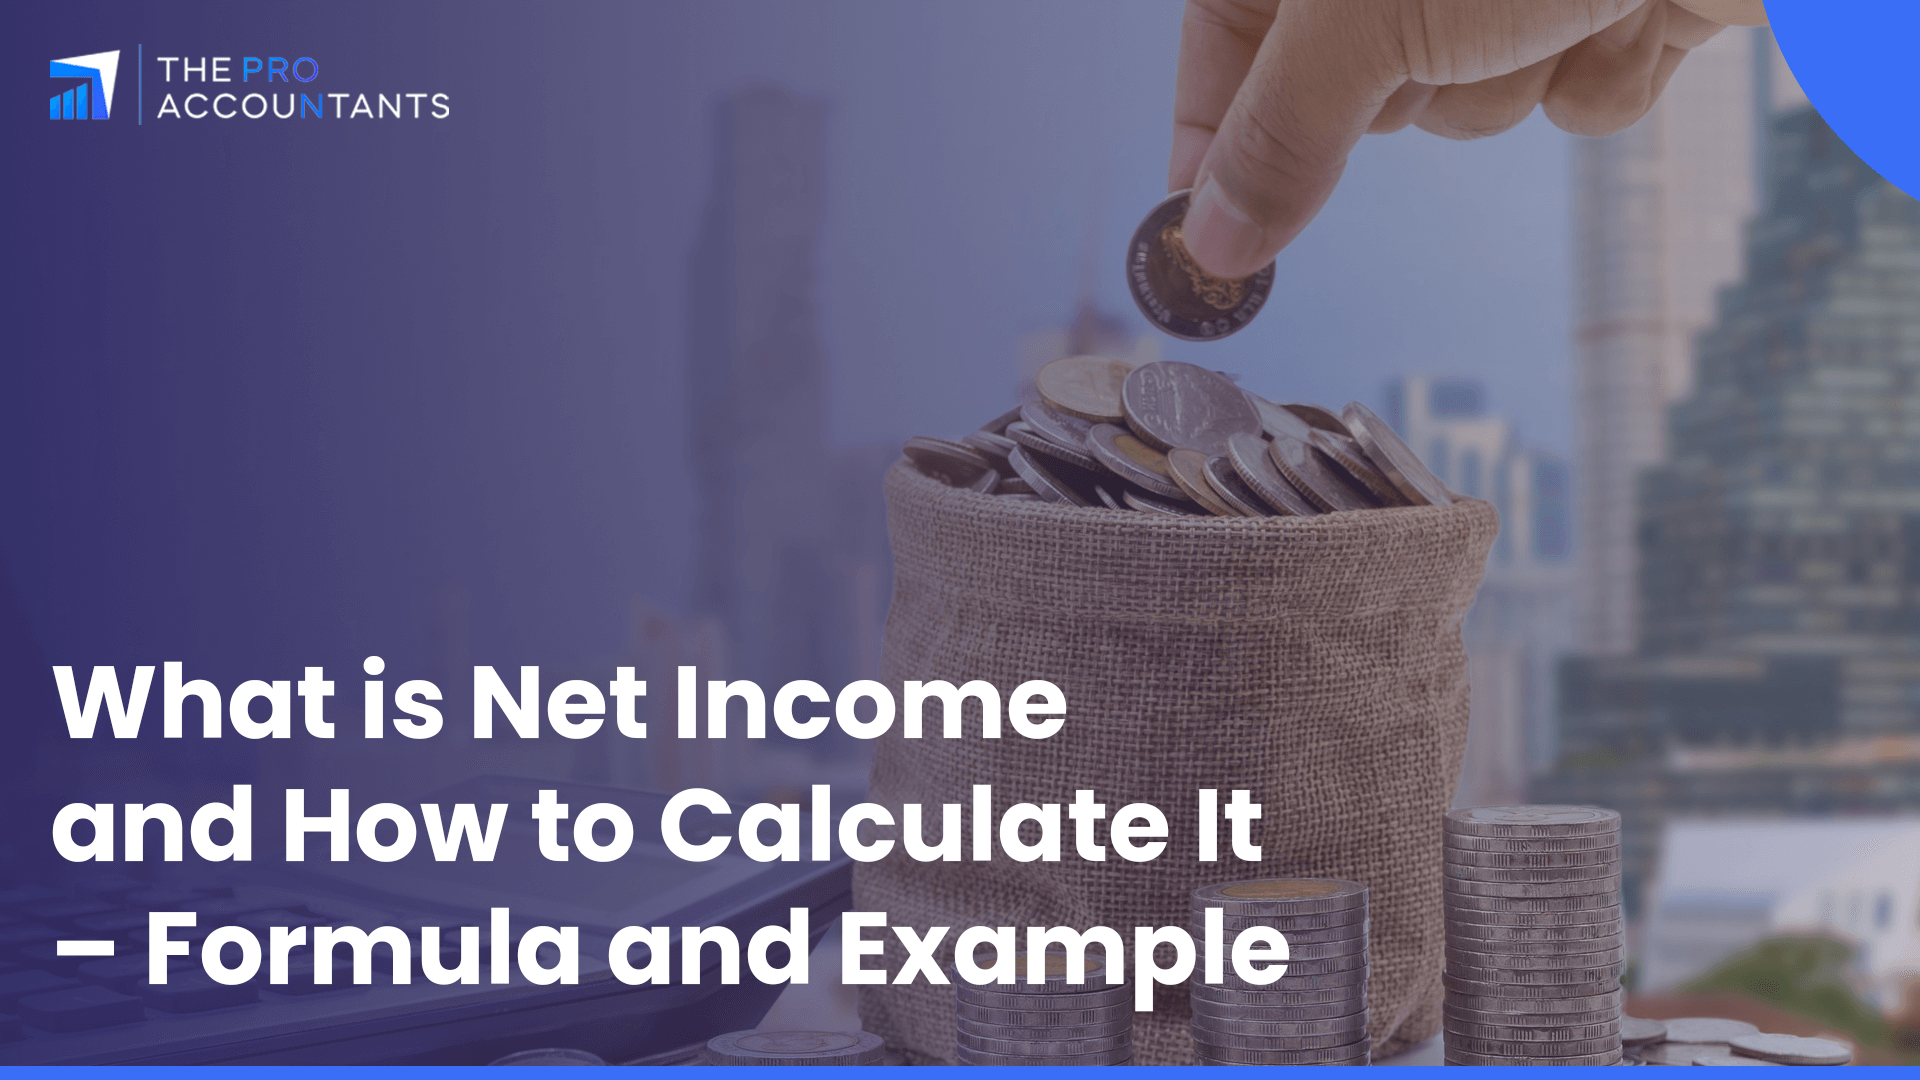 Net Income: How to Calculate it with Formulas and Examples